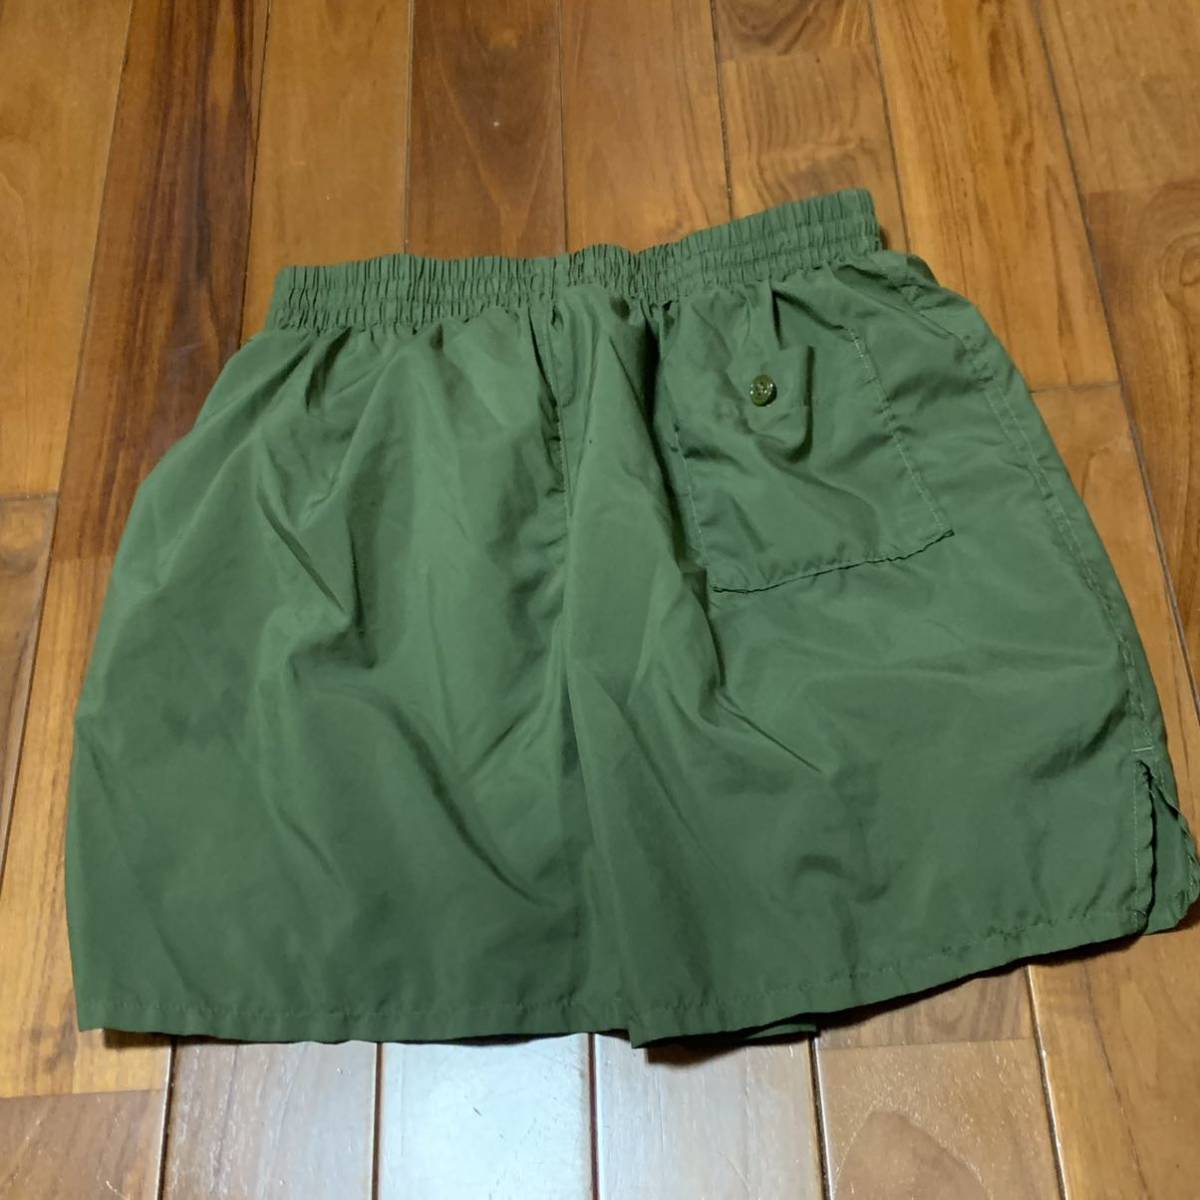  Okinawa the US armed forces discharge goods training pants short pants running sport outdoor .toreLARGE OD ( control number Z214)